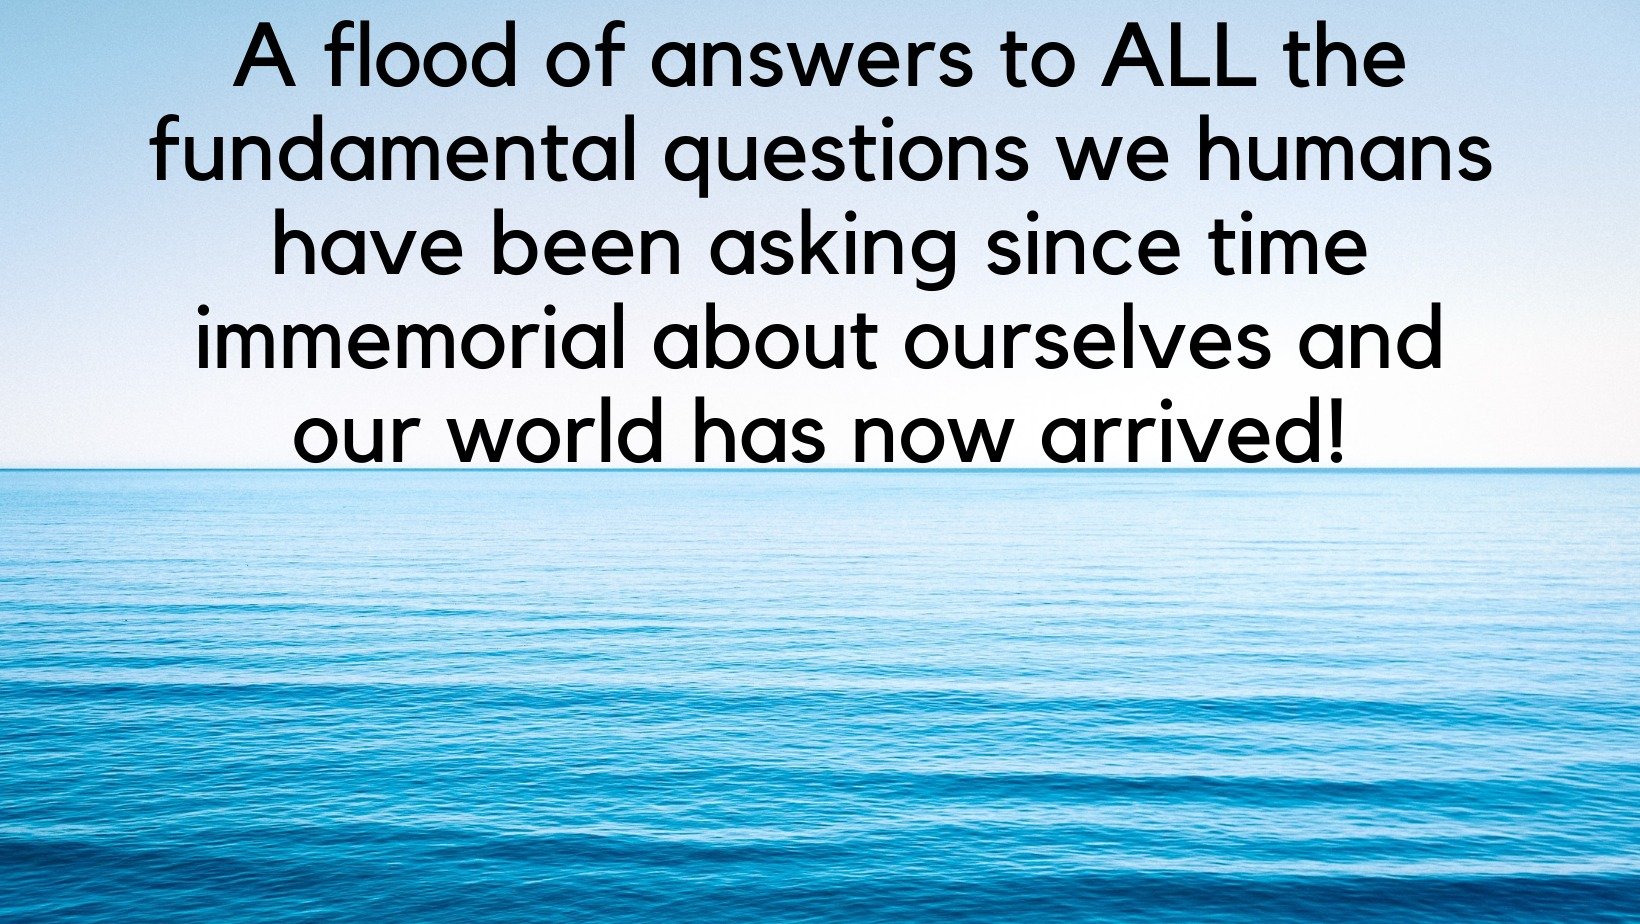 'A flood of answers to ALL the fundamental questions we humans have been asking since time immemorial about ourselves and our world has now arrived!'